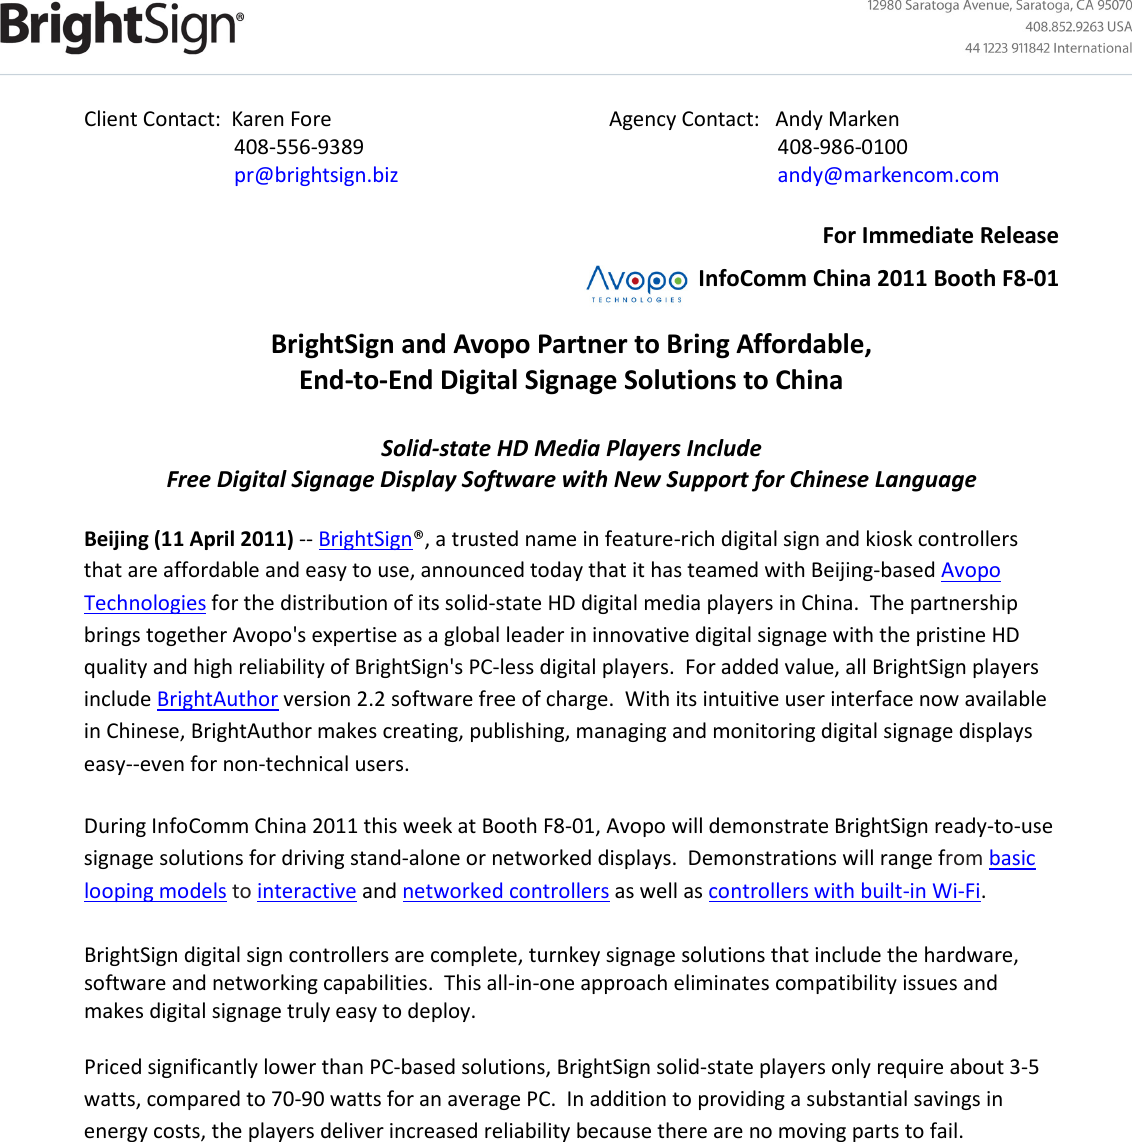 Page 1 of 3 - Bright Sign And Avopo Partner To Bring Affordable, End-to-End Digital Signage Solutions China